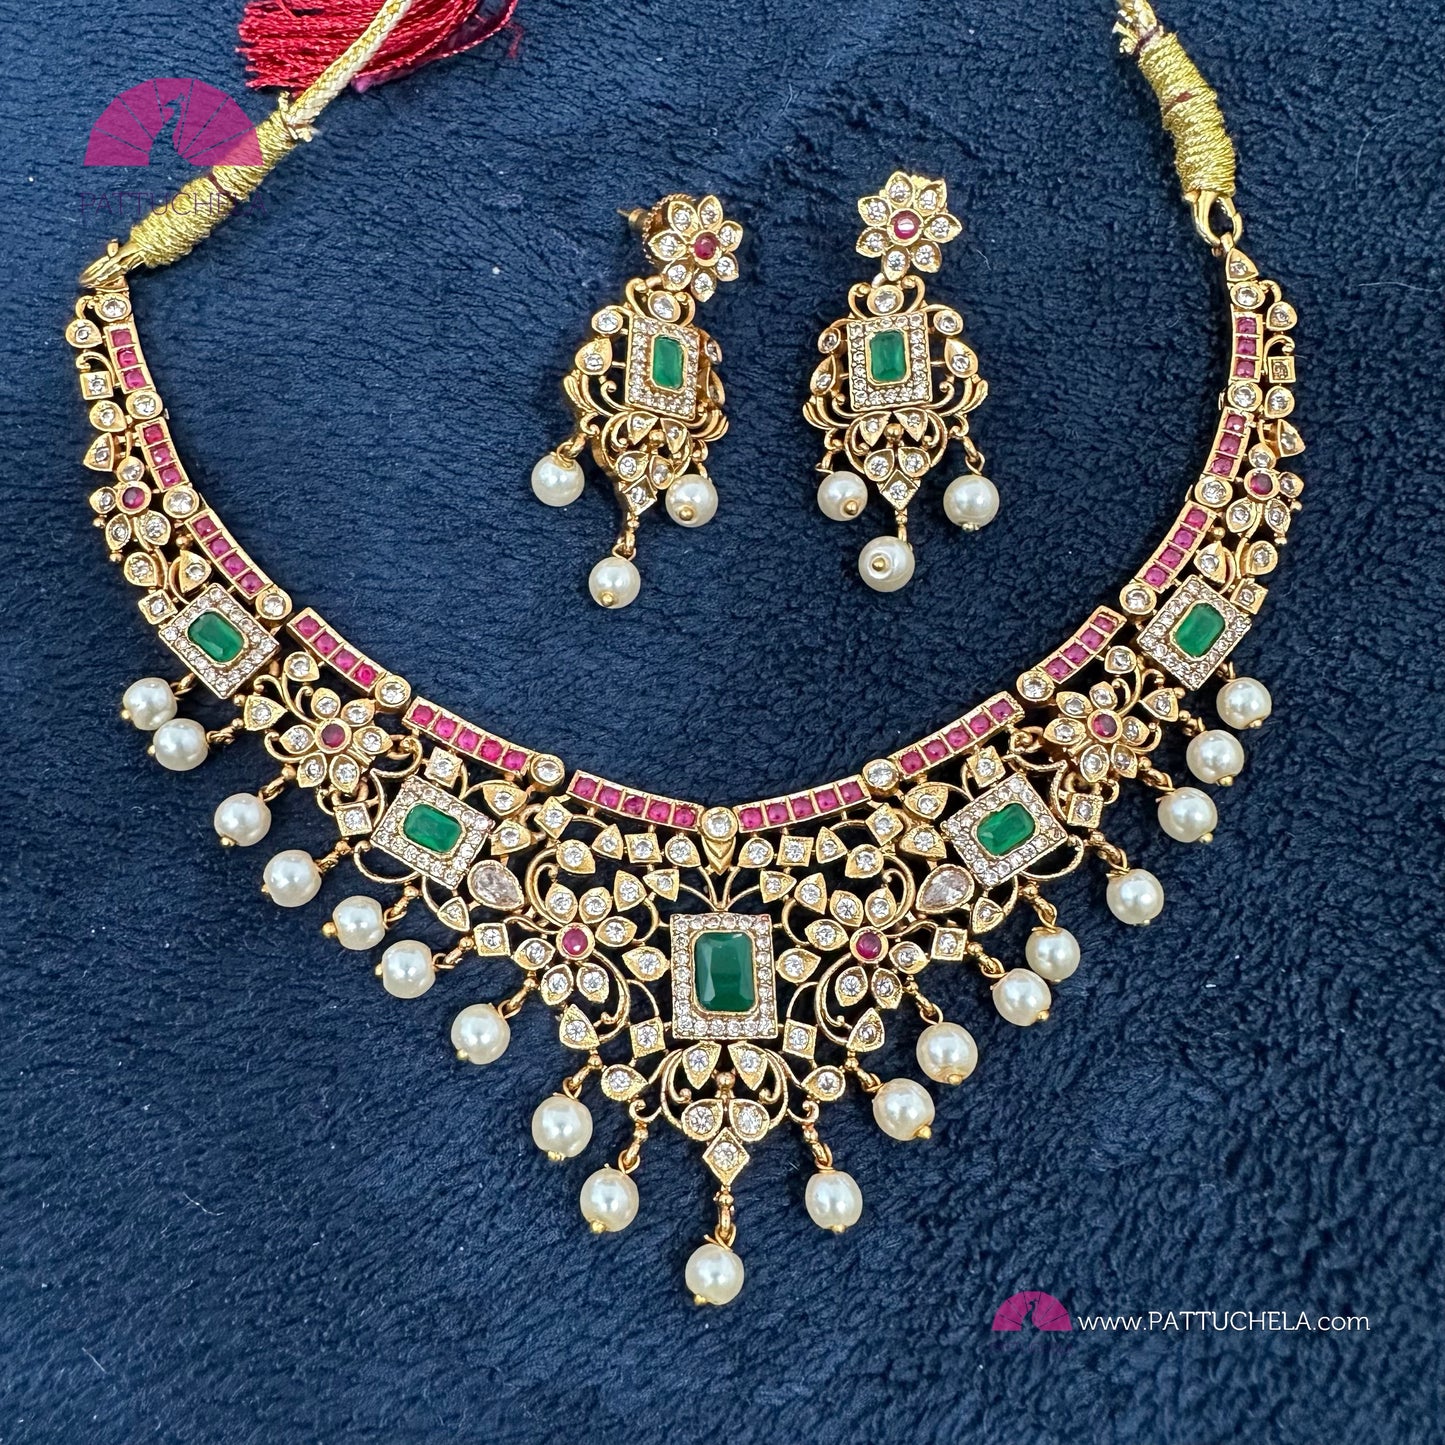 Beautiful Multicolour Stone Necklace Jewelry with earrings | Beaded Jewelry | Indian Jewelry